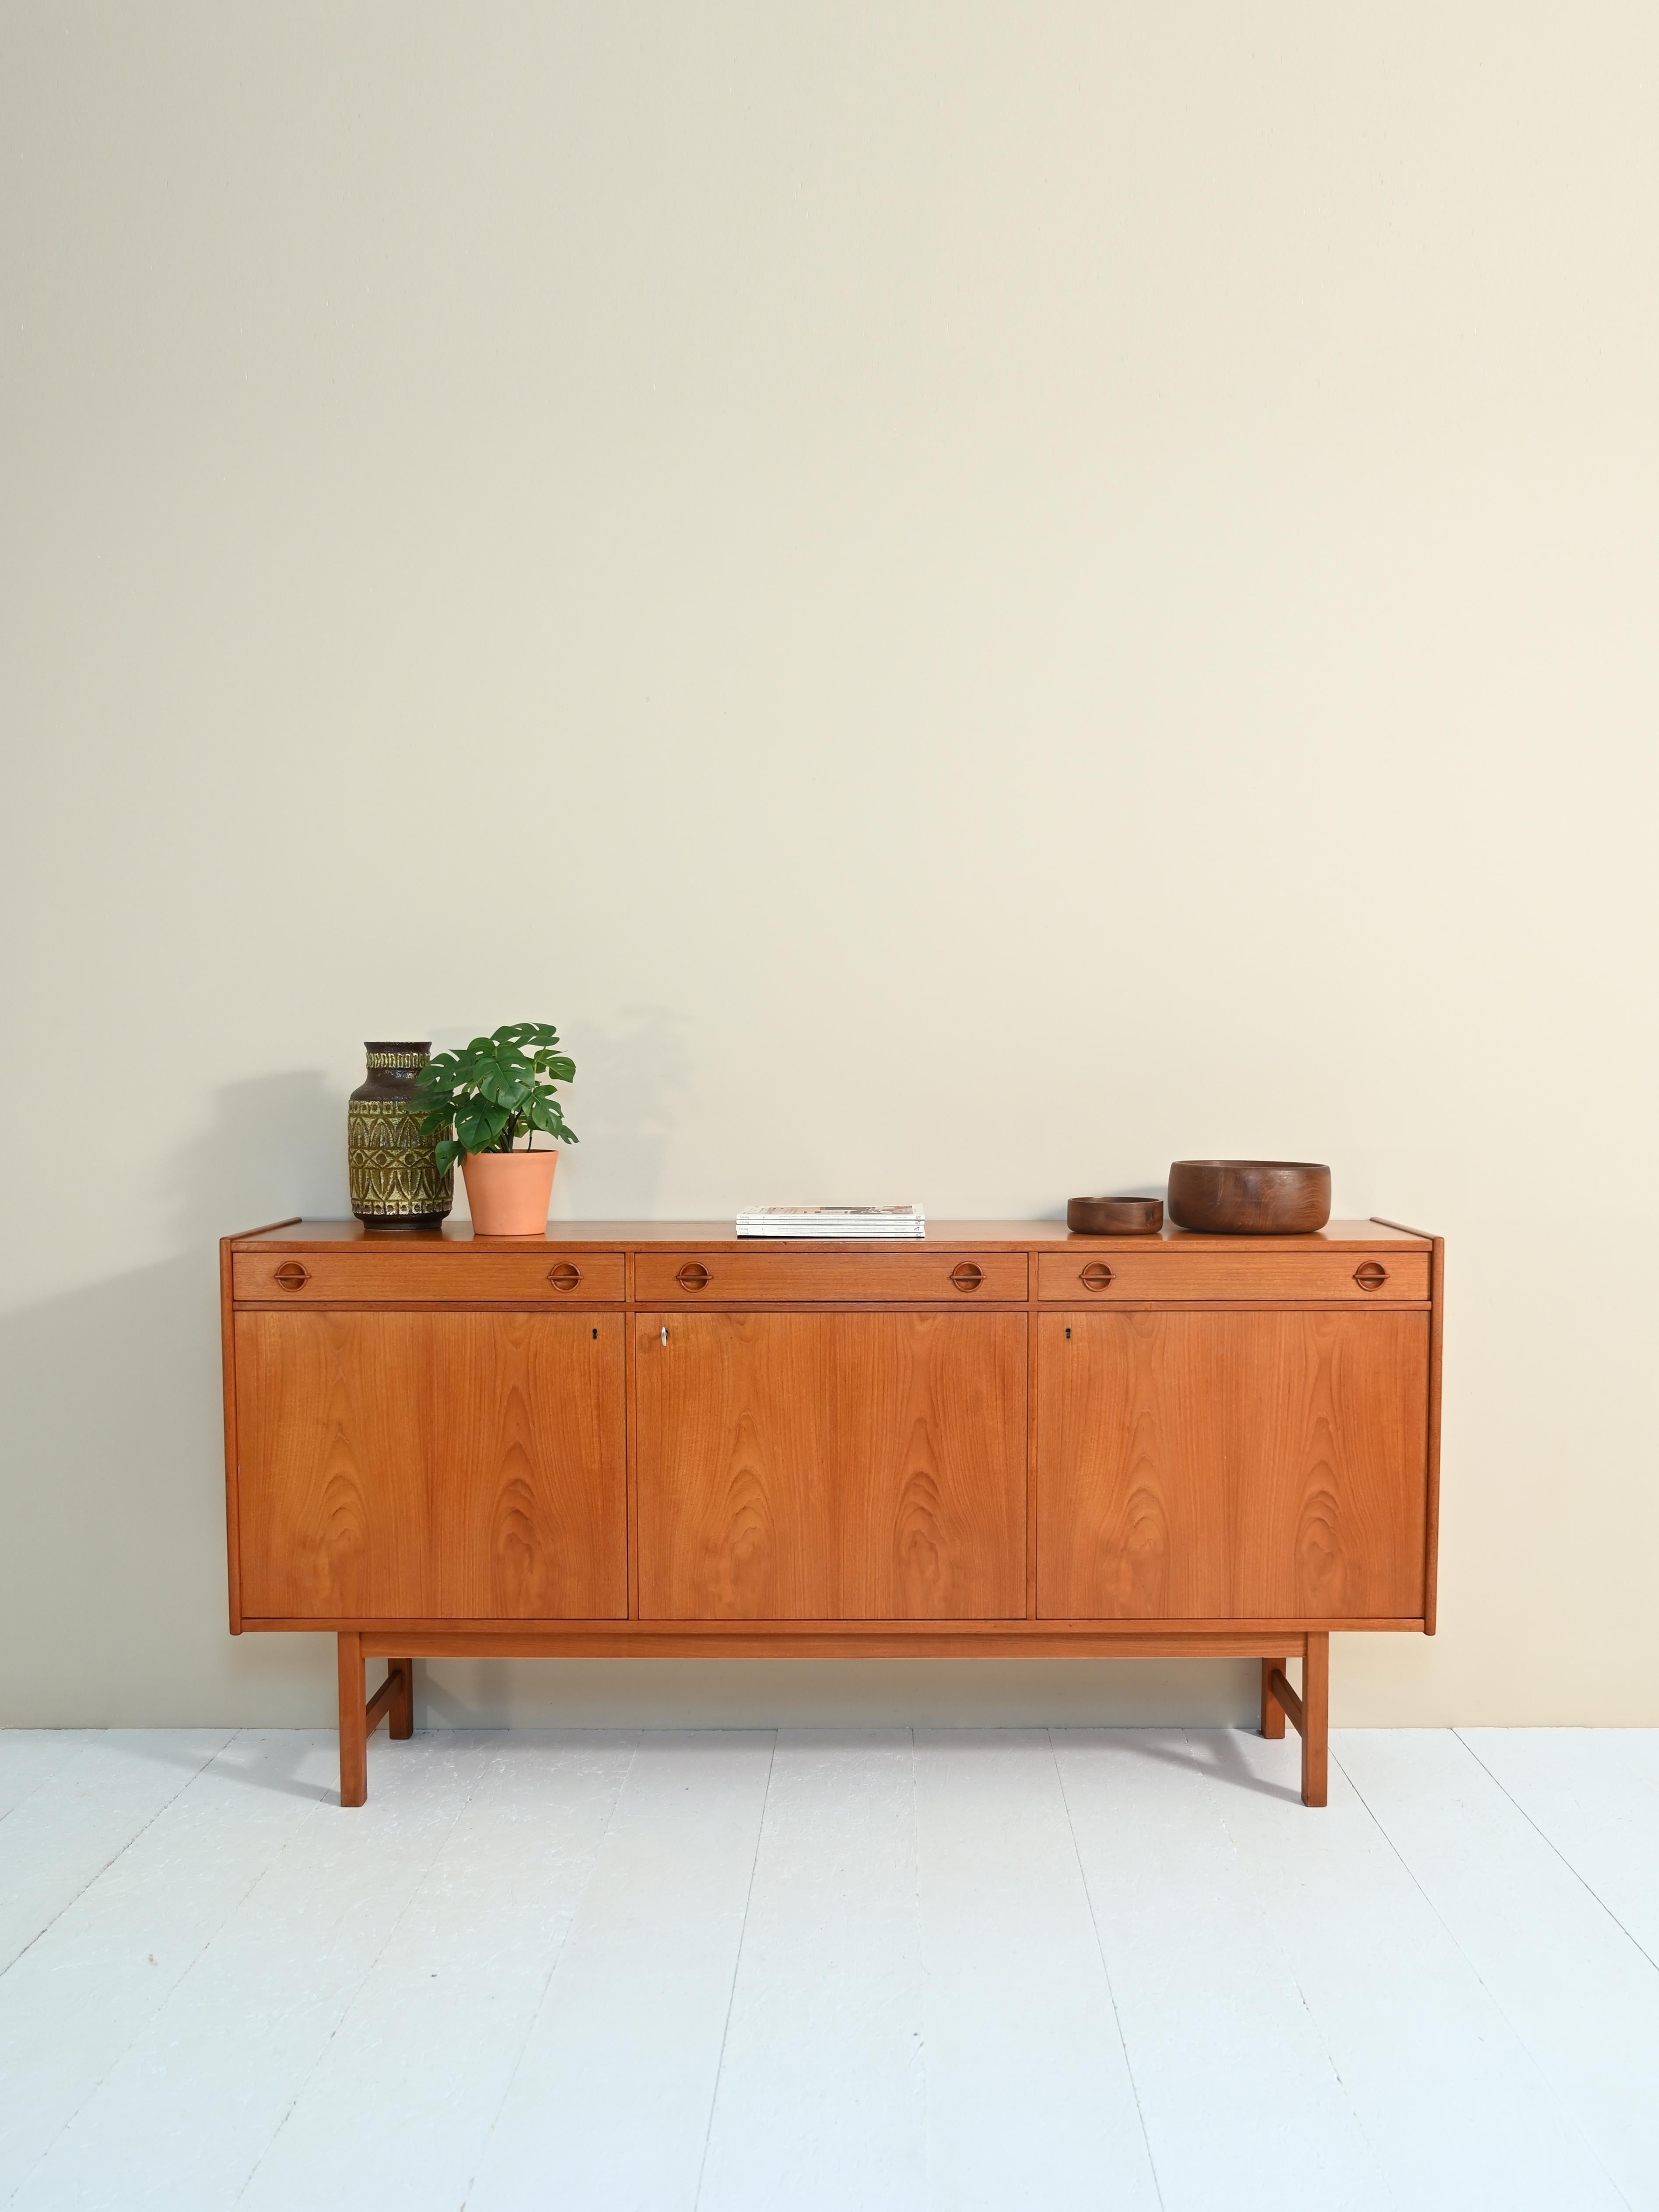 Original vintage 1950s sideboard of Scandinavian origin.
 
Divided into three equal parts consisting of a drawer under which is a compartment equipped with a shelf.

Scandinavian workmanship is evidenced by the attention to detail such as the